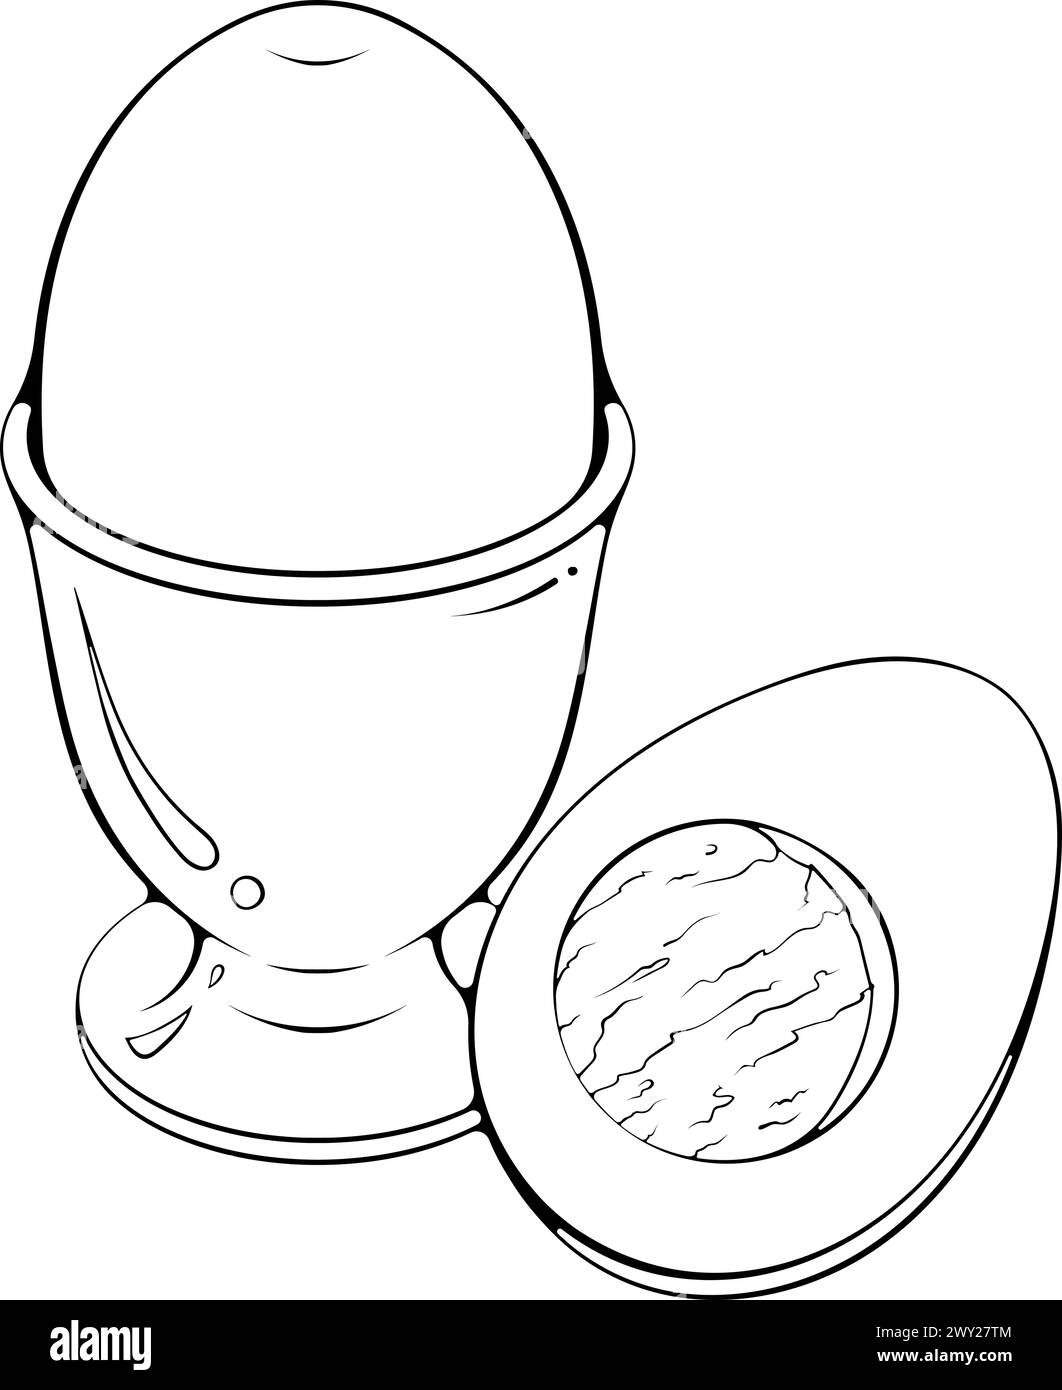 Egg on a stand line art Stock Vector